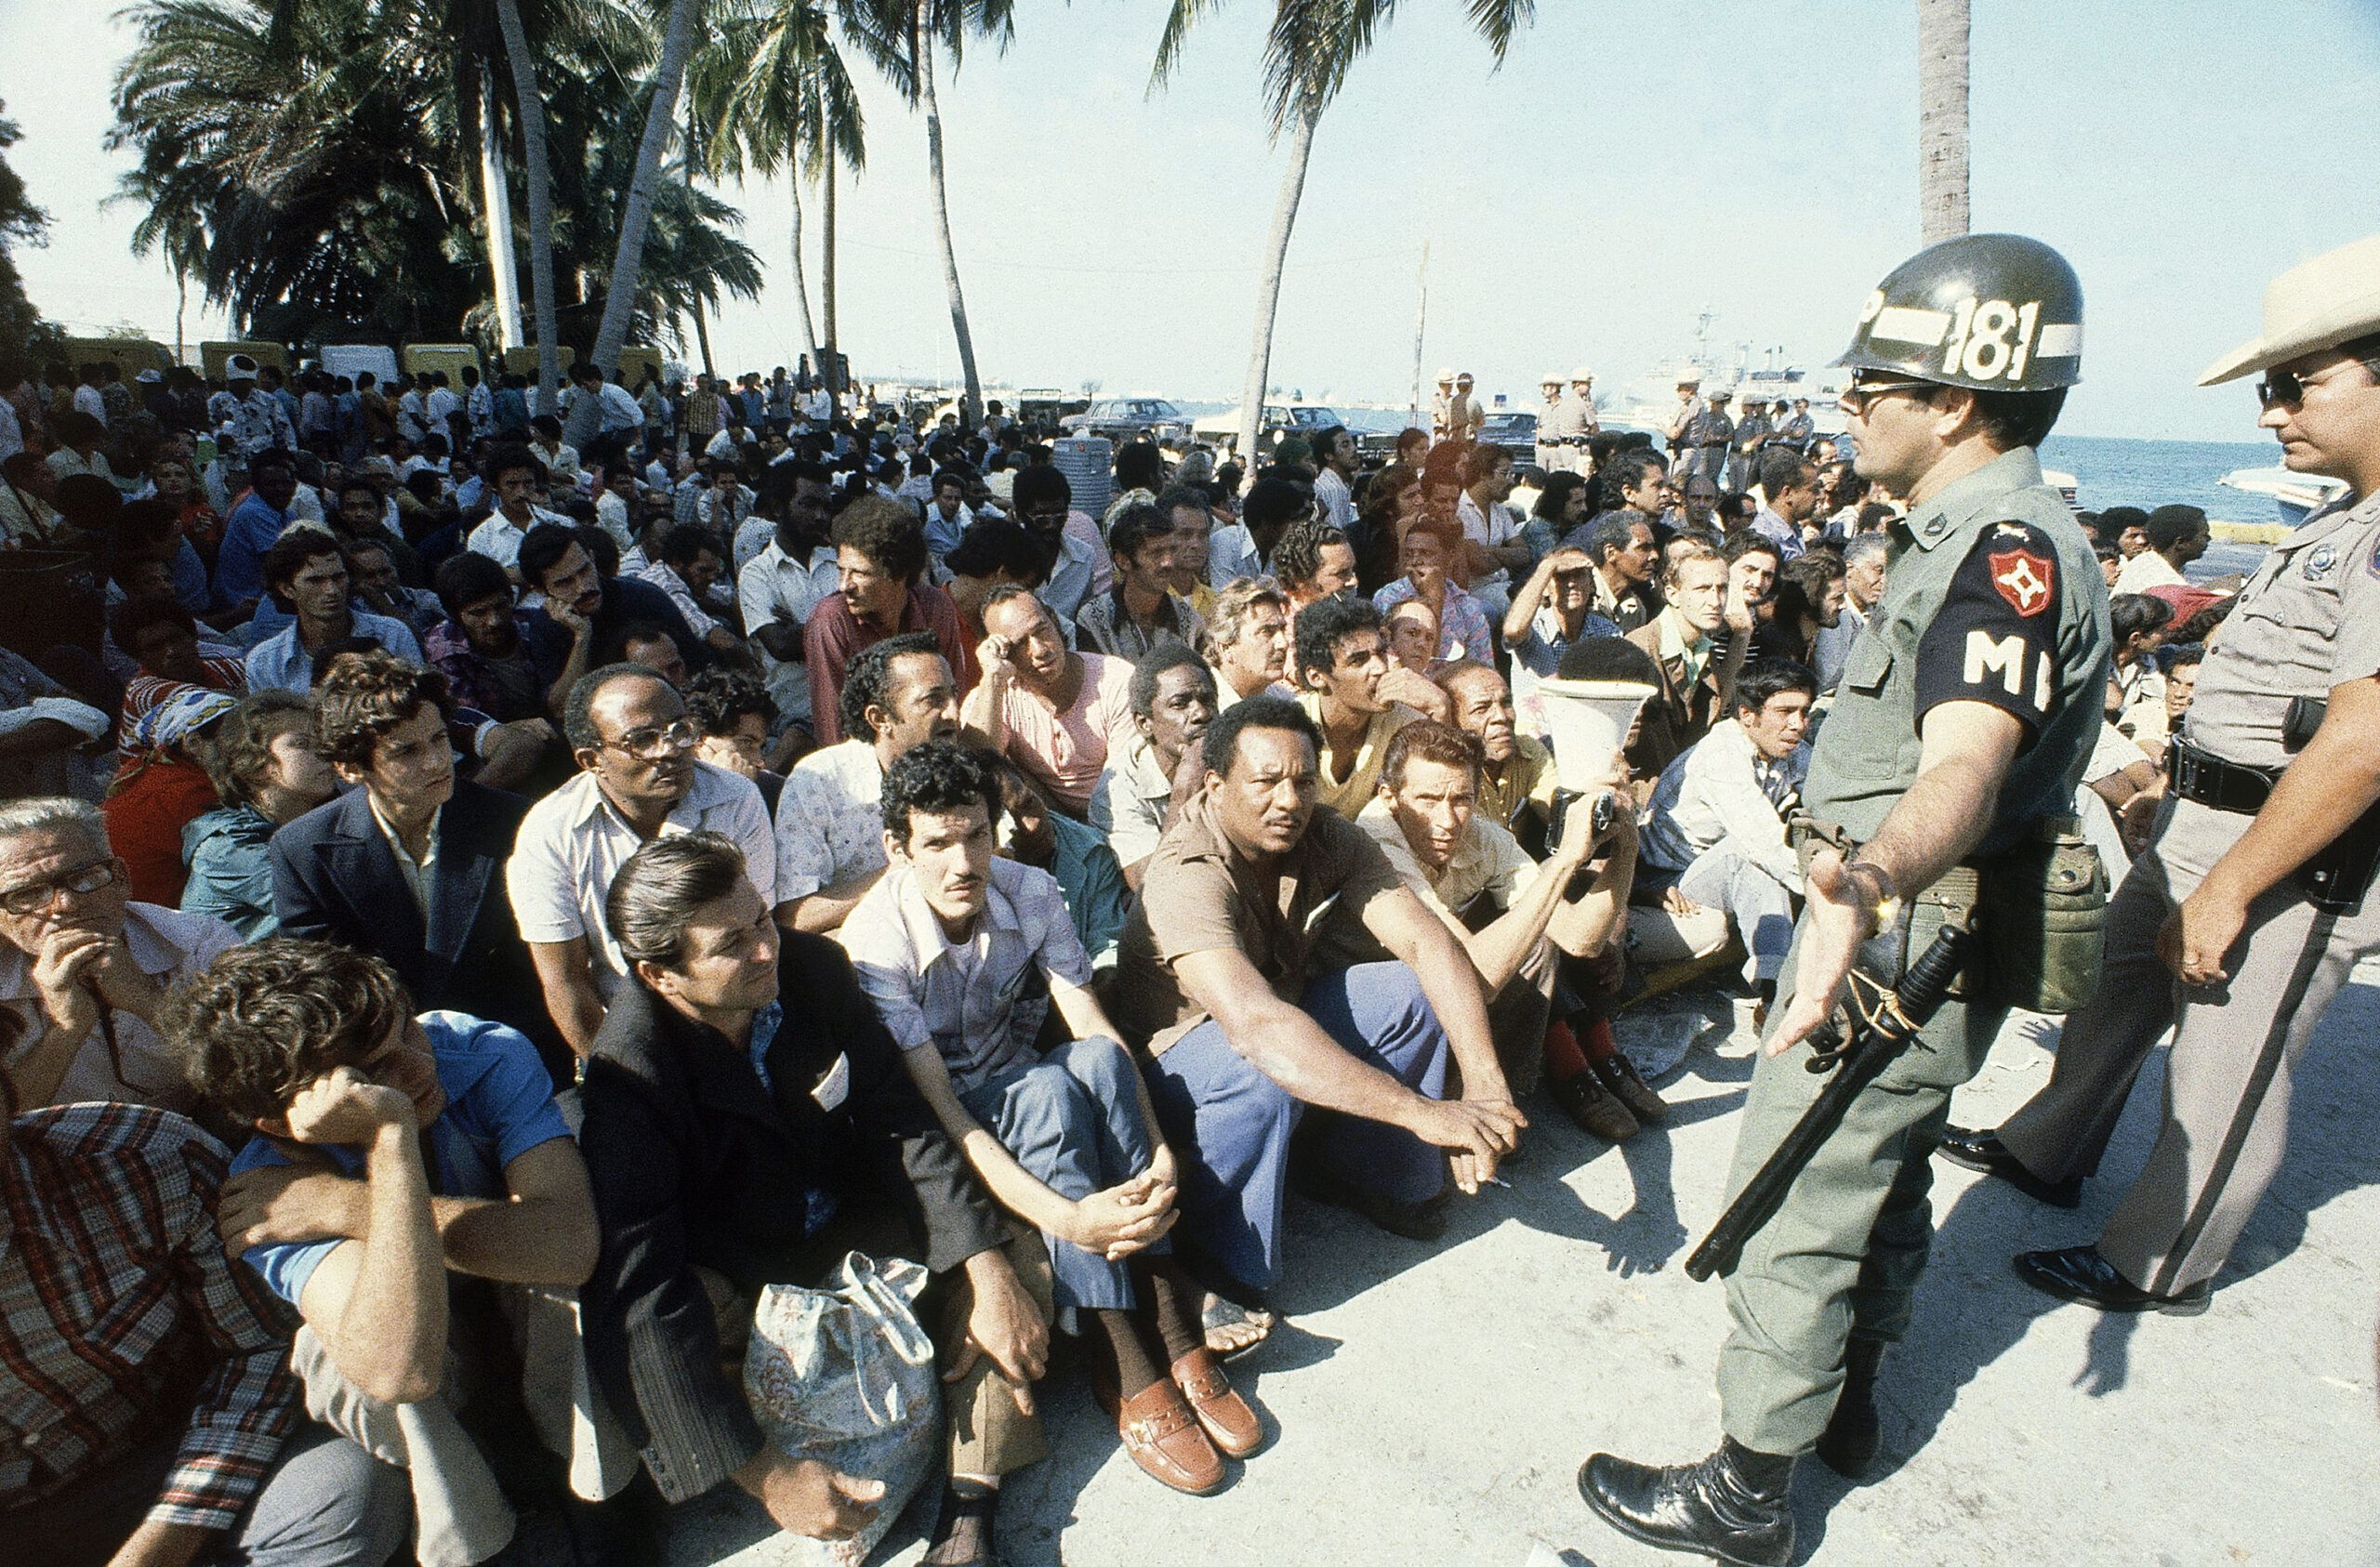 Cuban refugees arriving in Key West, Florida in May 1980